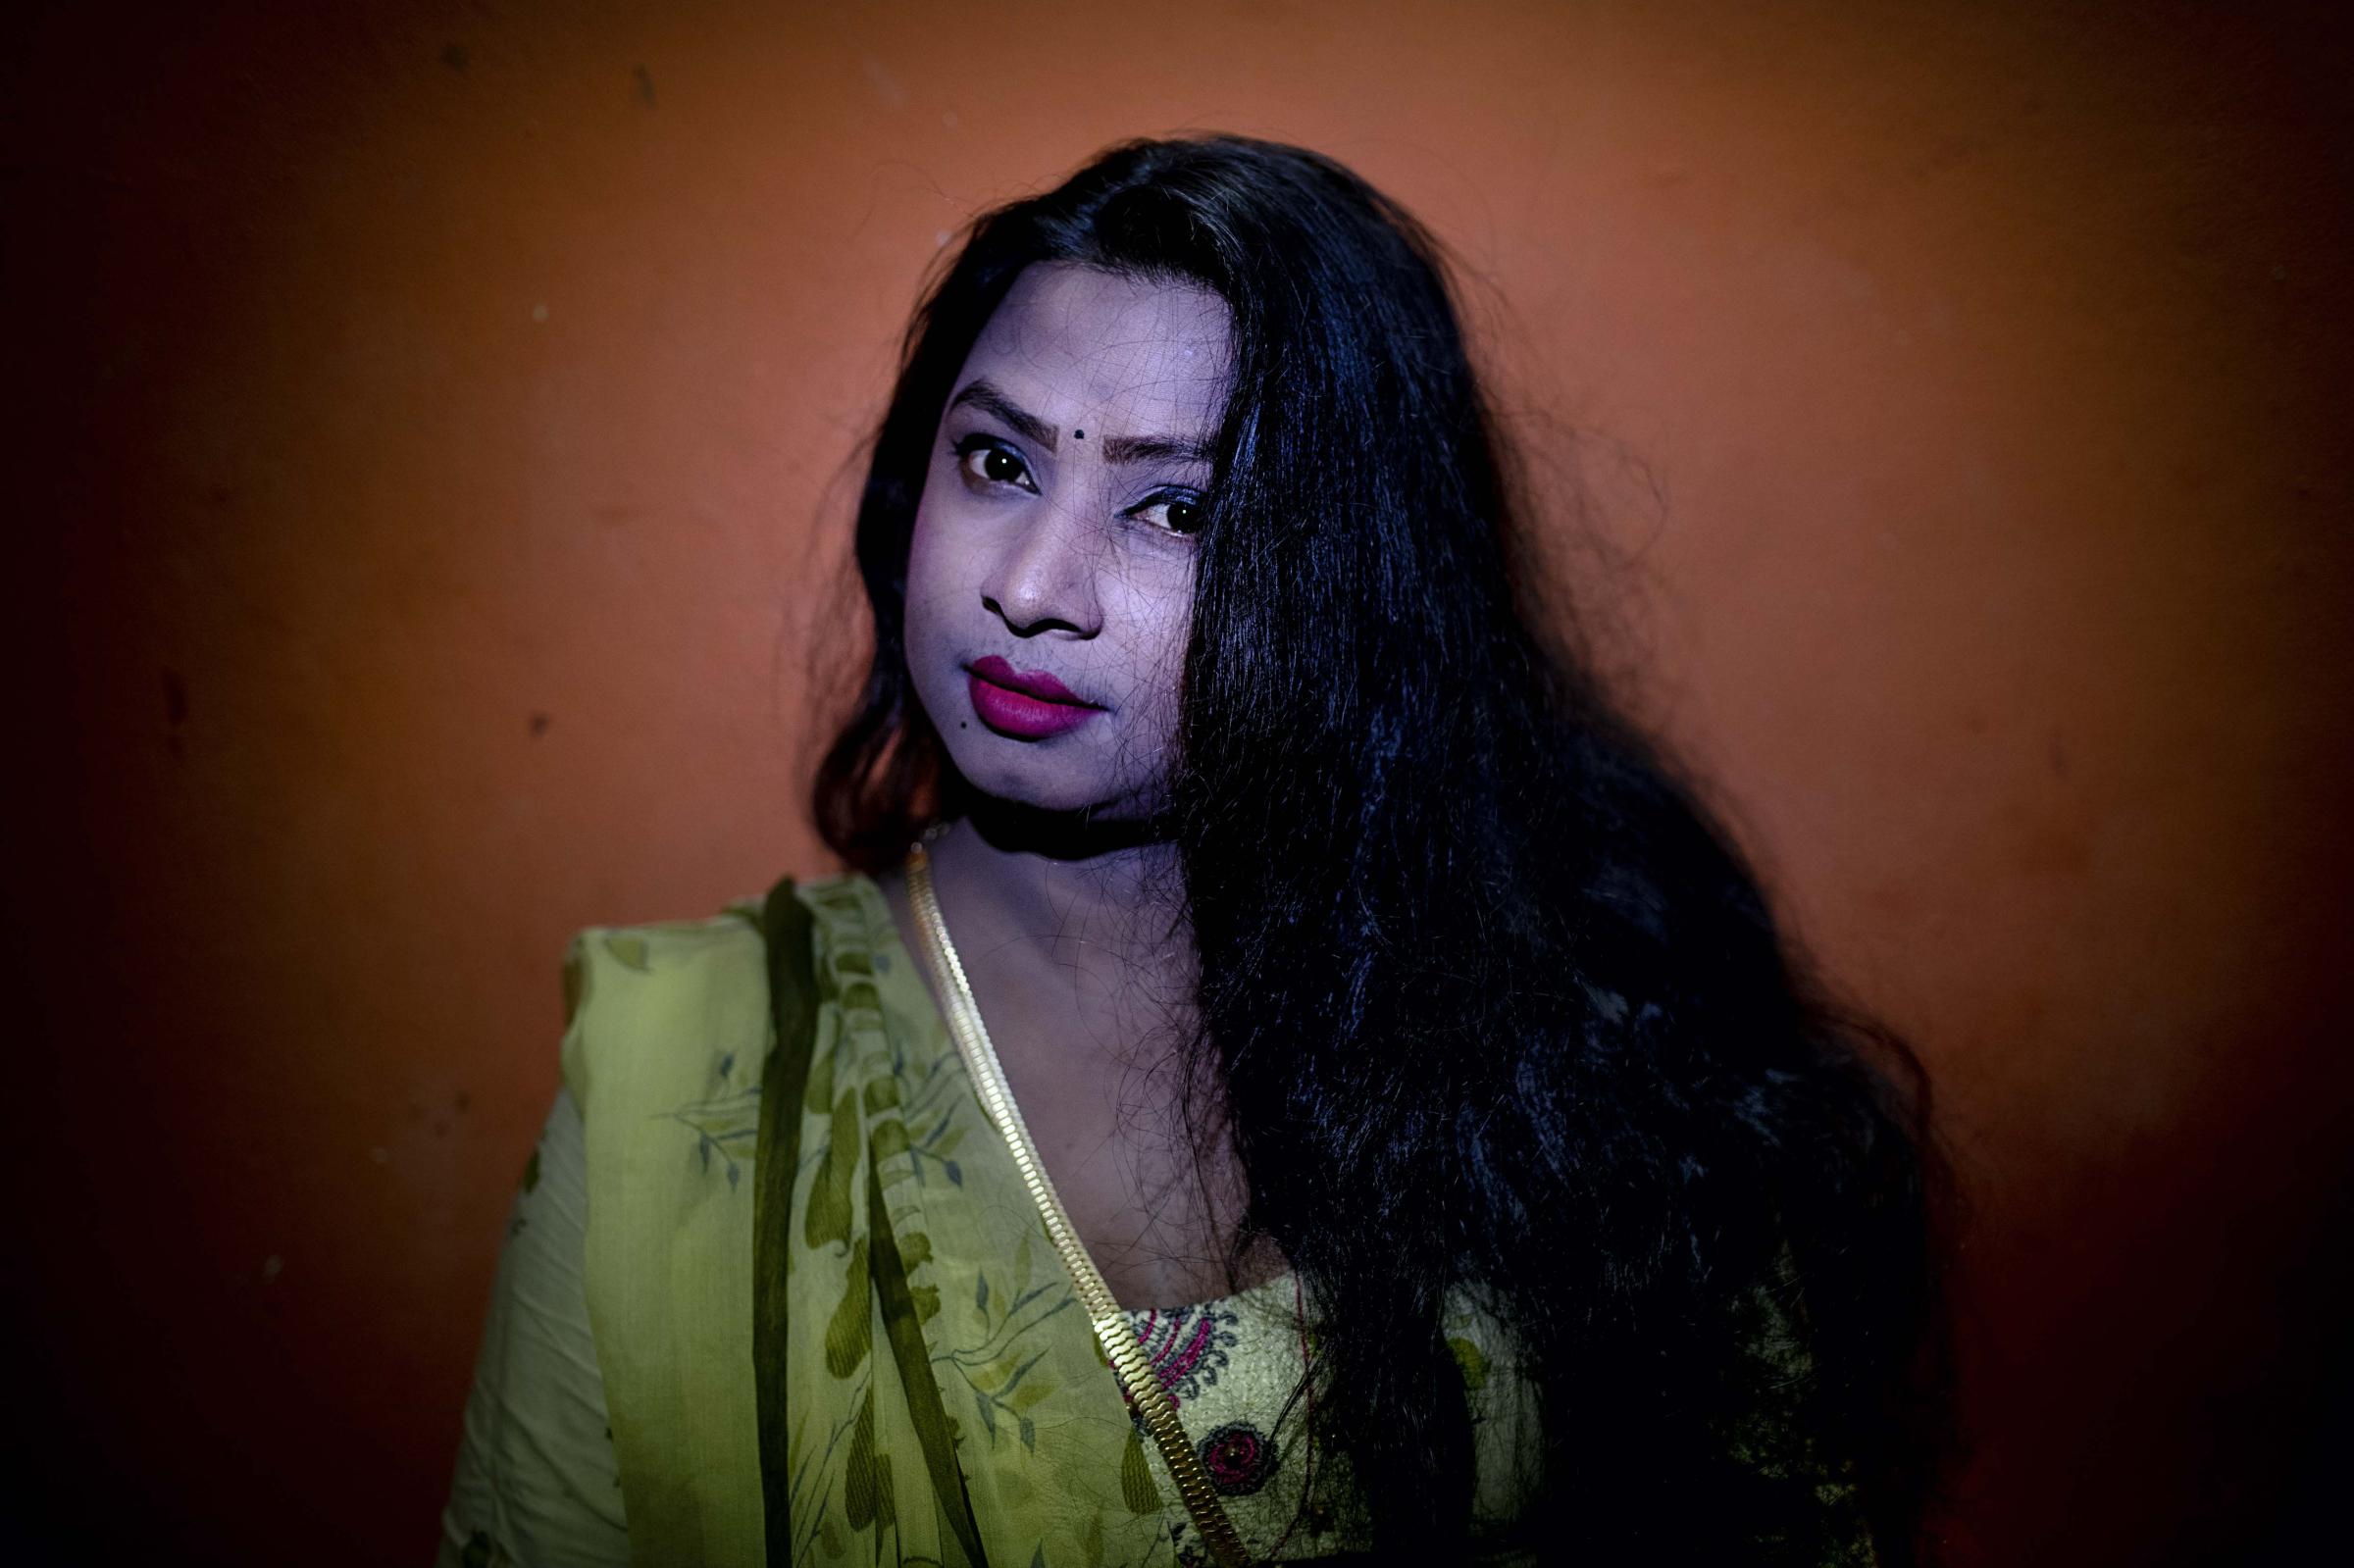 Neither Man nor Woman - Alisha a transgender poses for the photographer, she took...